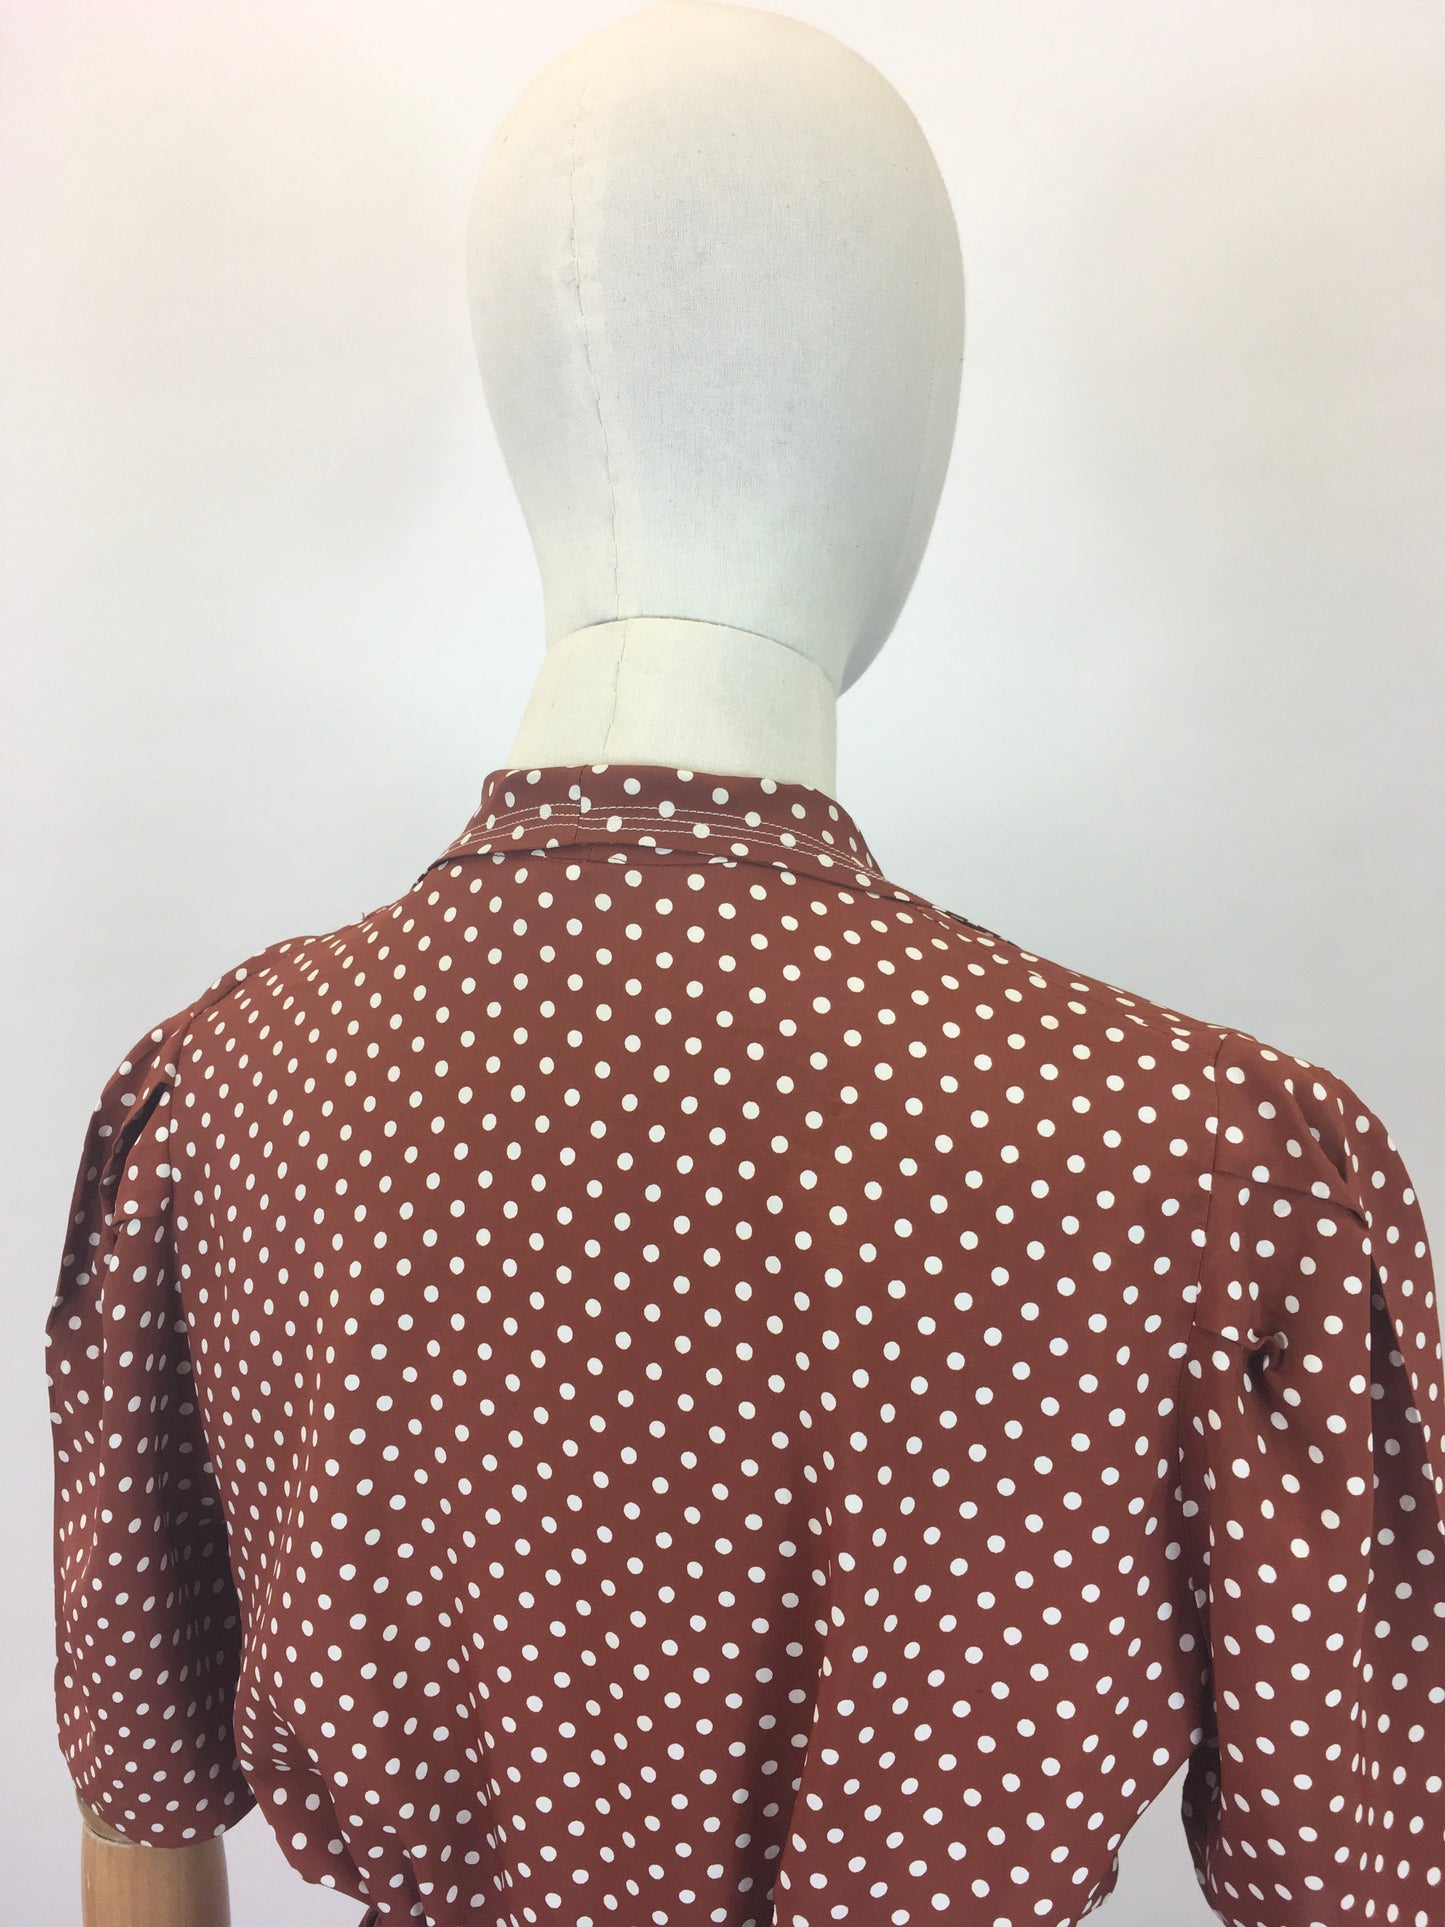 Original 1940s Beautiful Polka Dot Dress - Chestnut Brown with white dots.